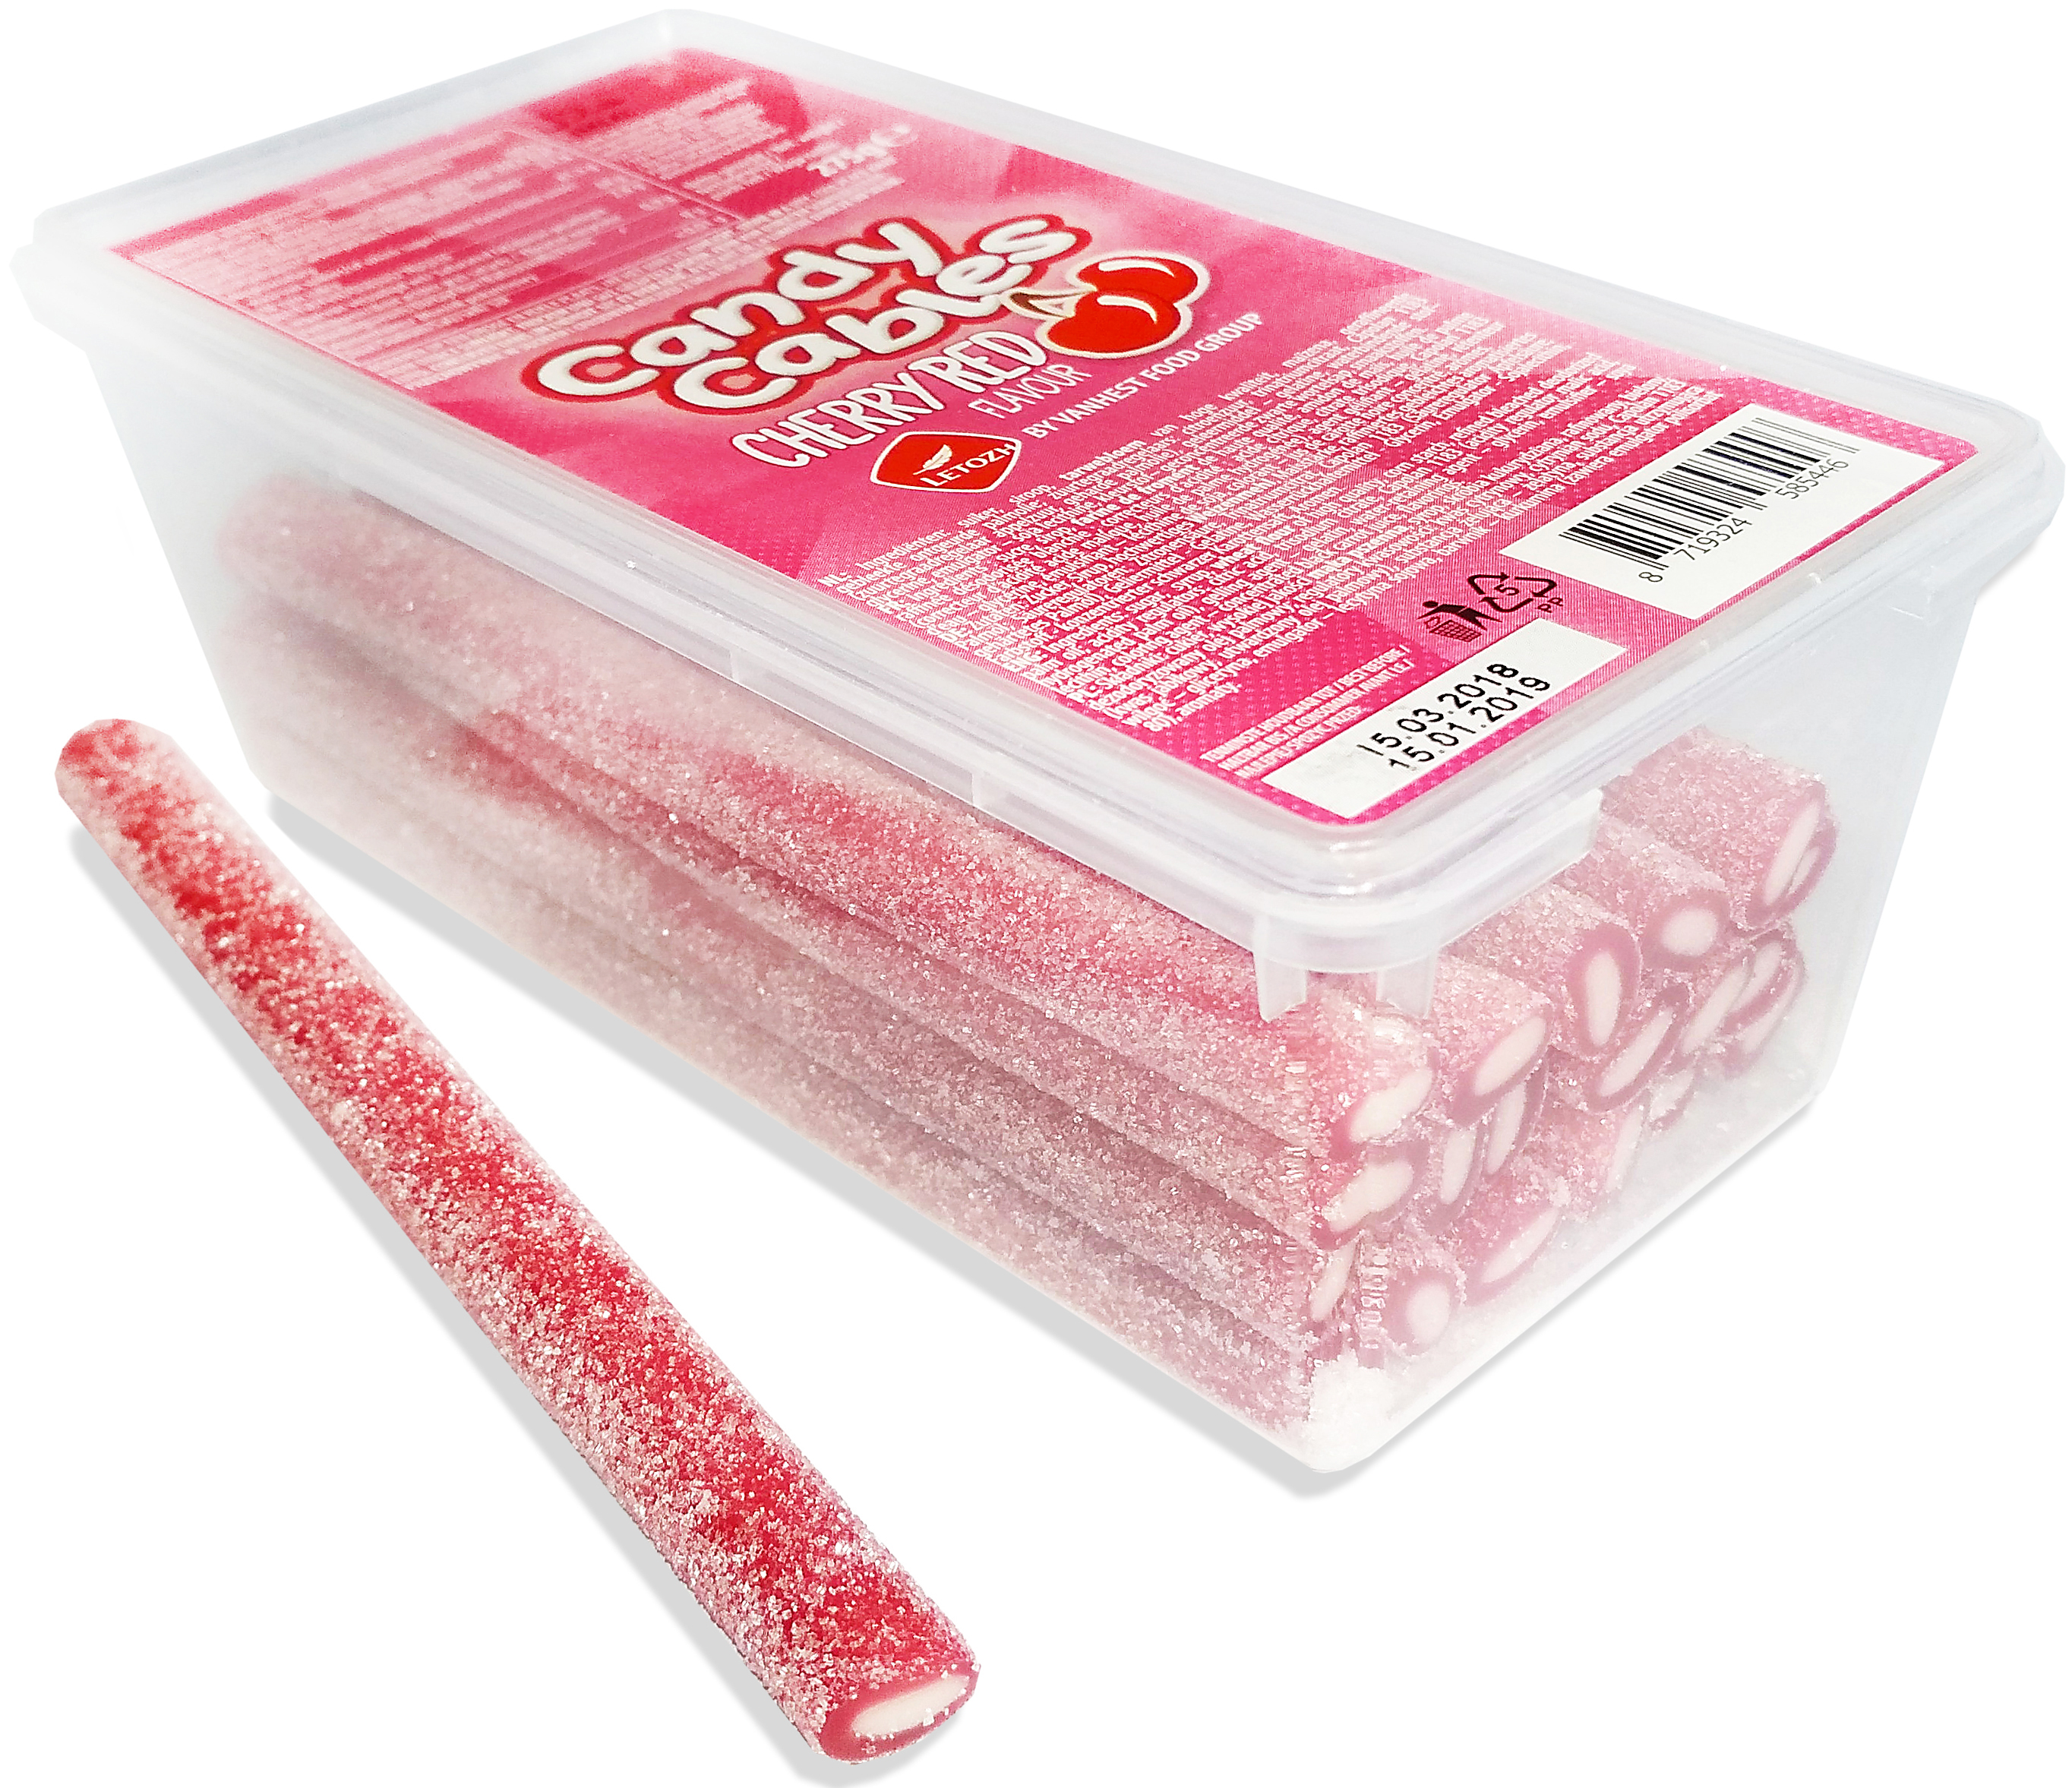 Cables со вкусом cherry flavour sweets in sour-sweet dusting, jelly filled